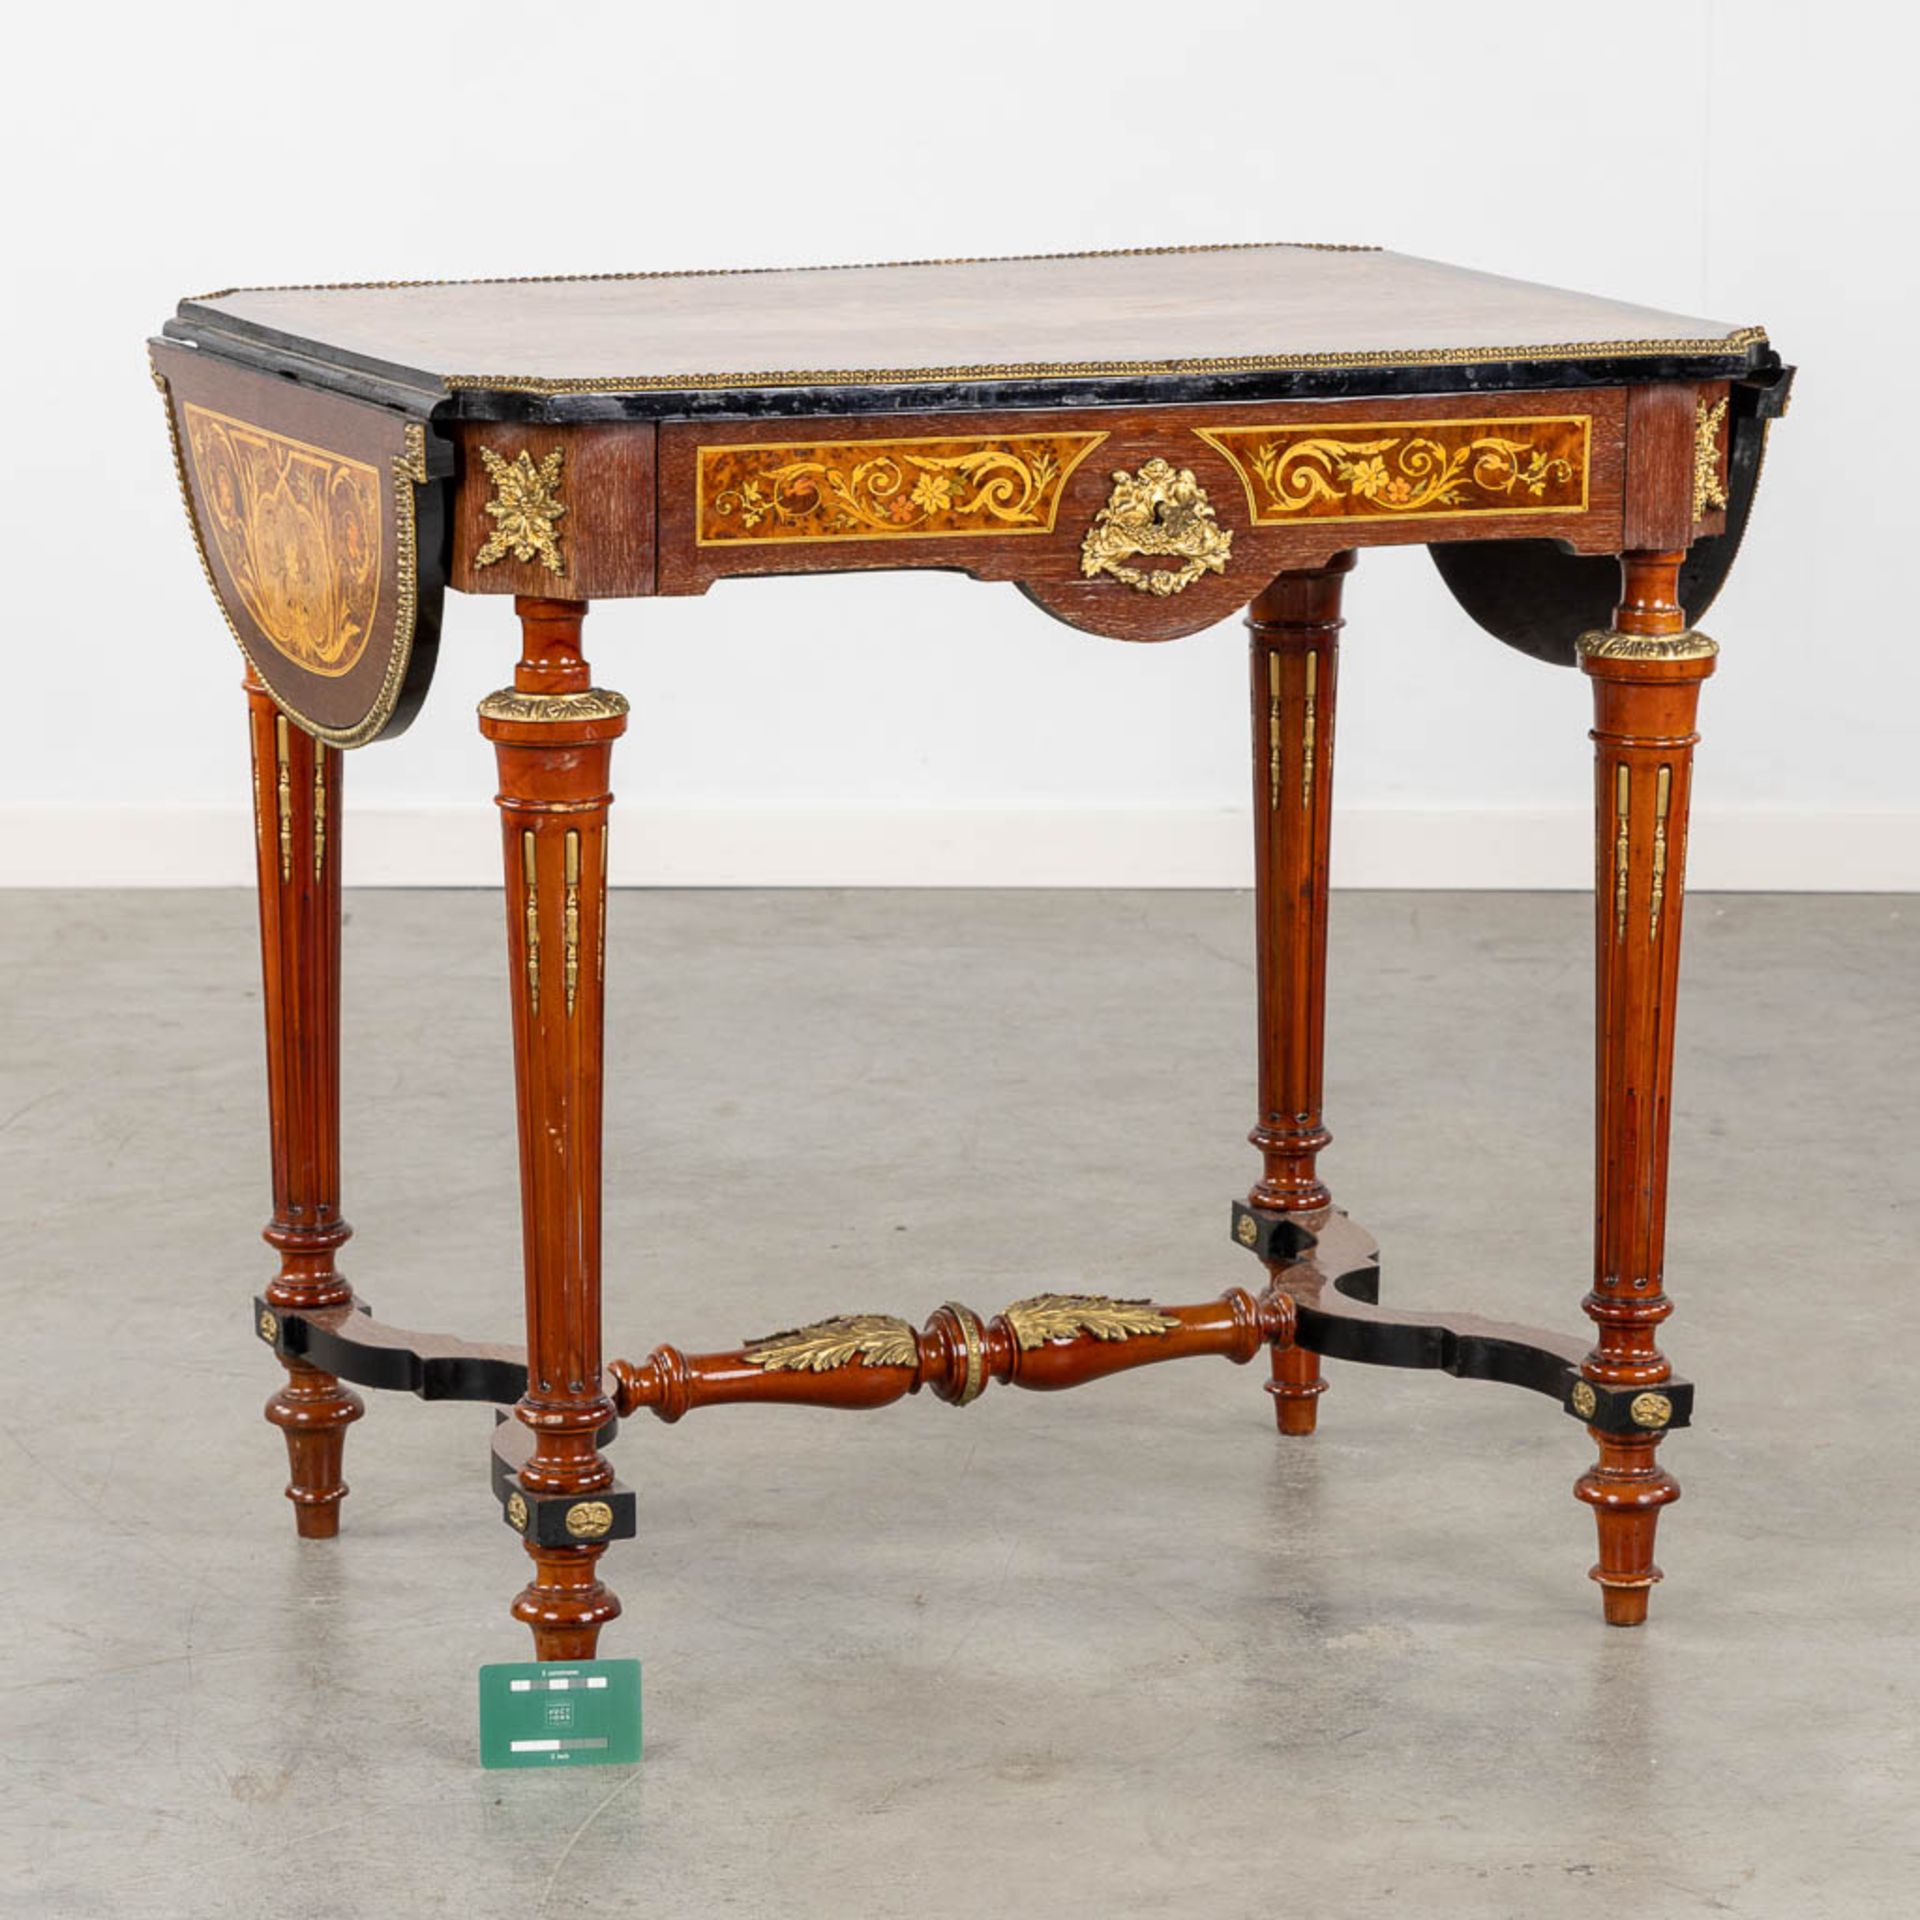 A side table/play table, marquetry inlay and mounted with bronze. 20th C. (L:57 x W:115 x H:74 cm) - Bild 2 aus 19